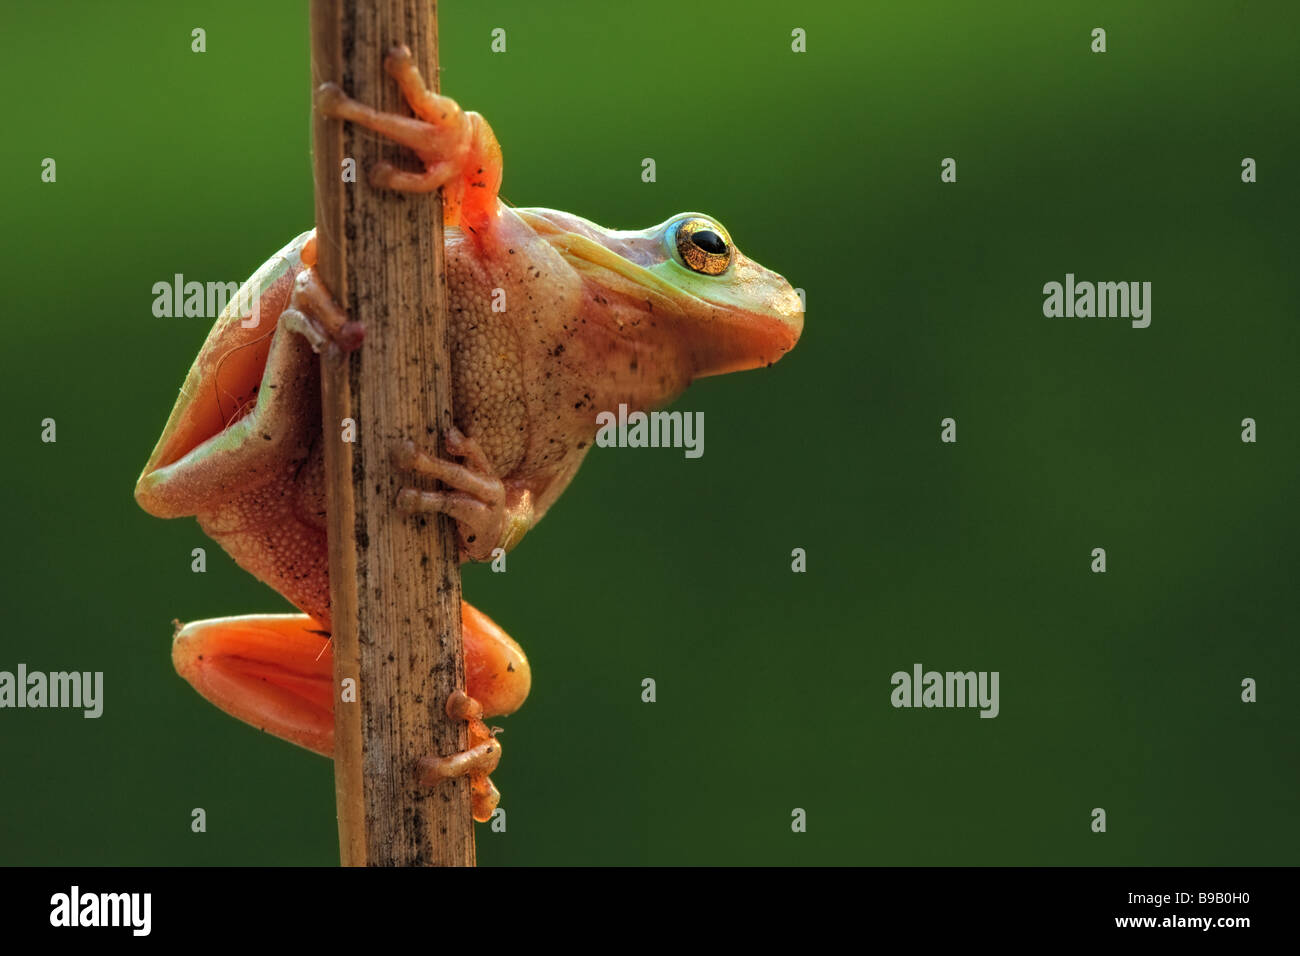 Common tree frog hanging on a branch Stock Photo